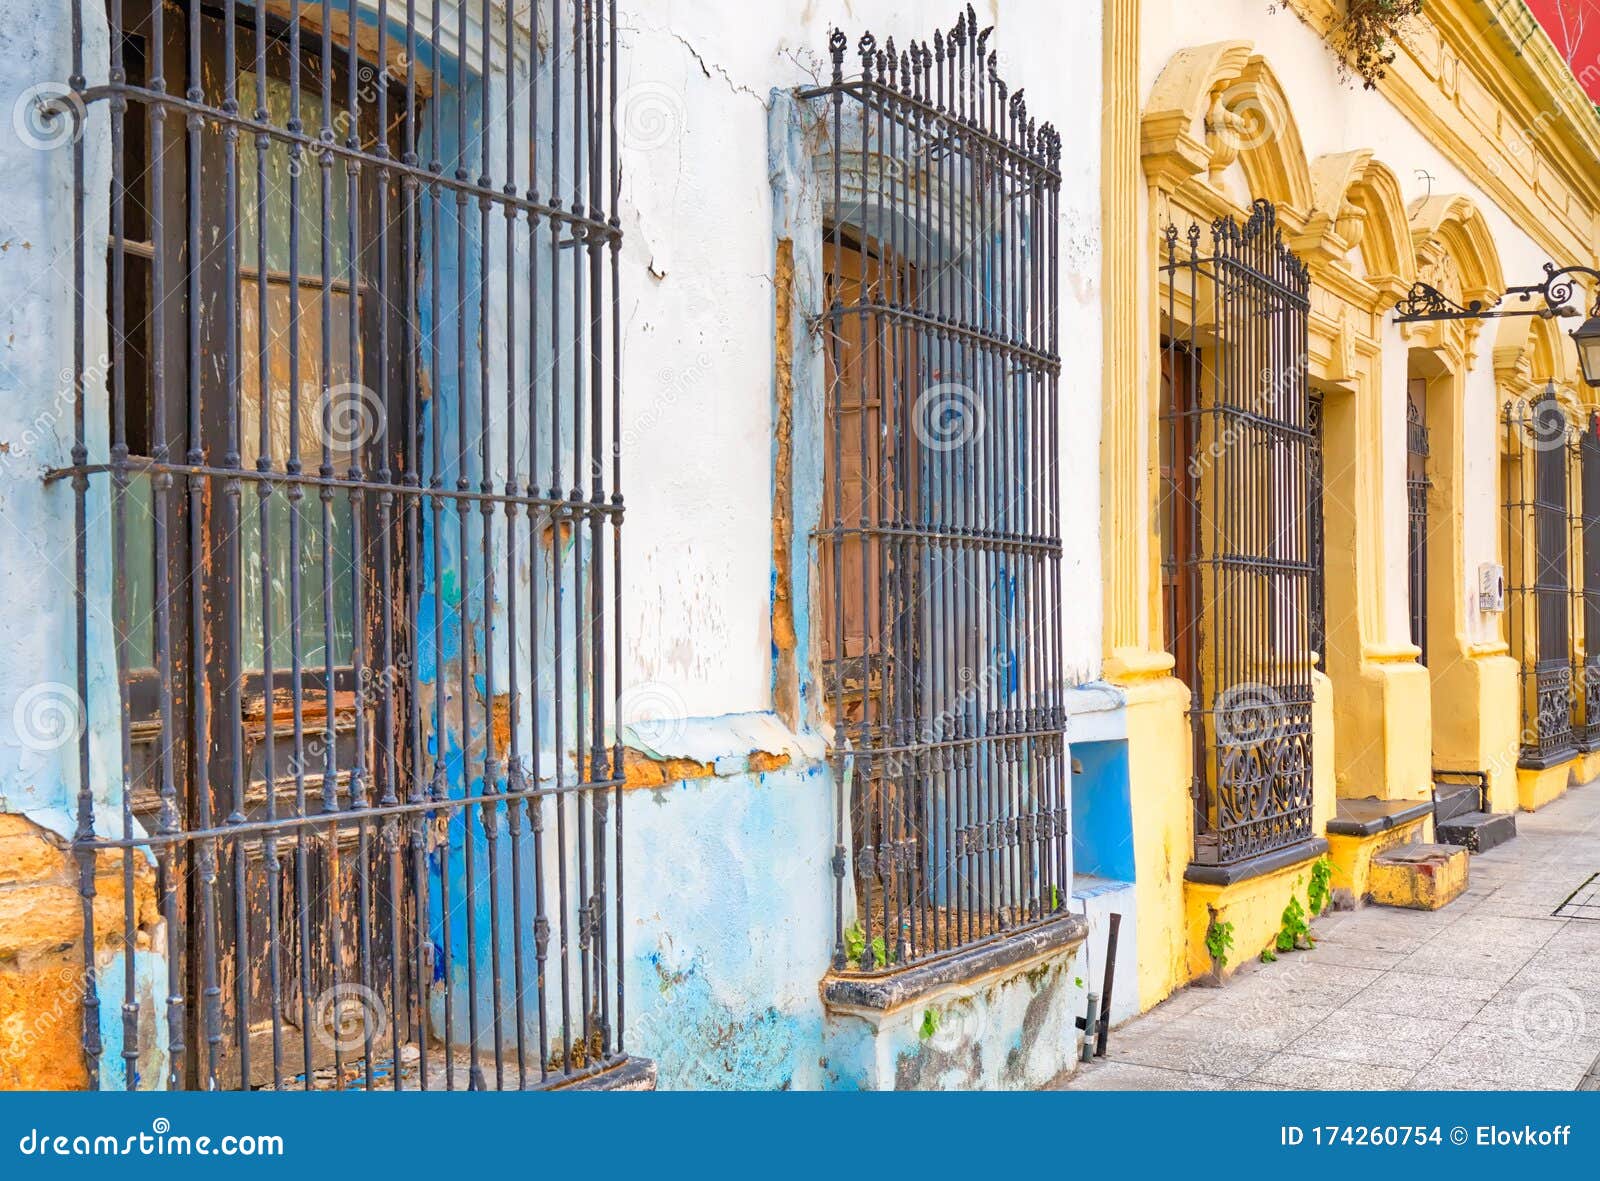 monterrey, colorful historic buildings in the center of the old city barrio antiguo at a peak tourist season